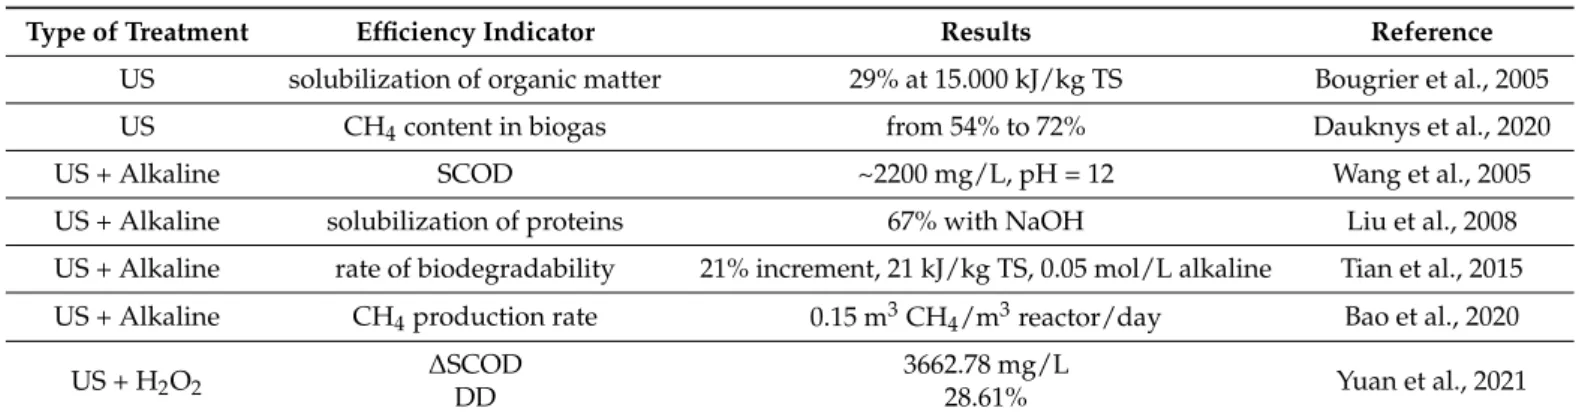 Table 2. Summary of results of ultrasound and combined treatment in terms of efficiency.